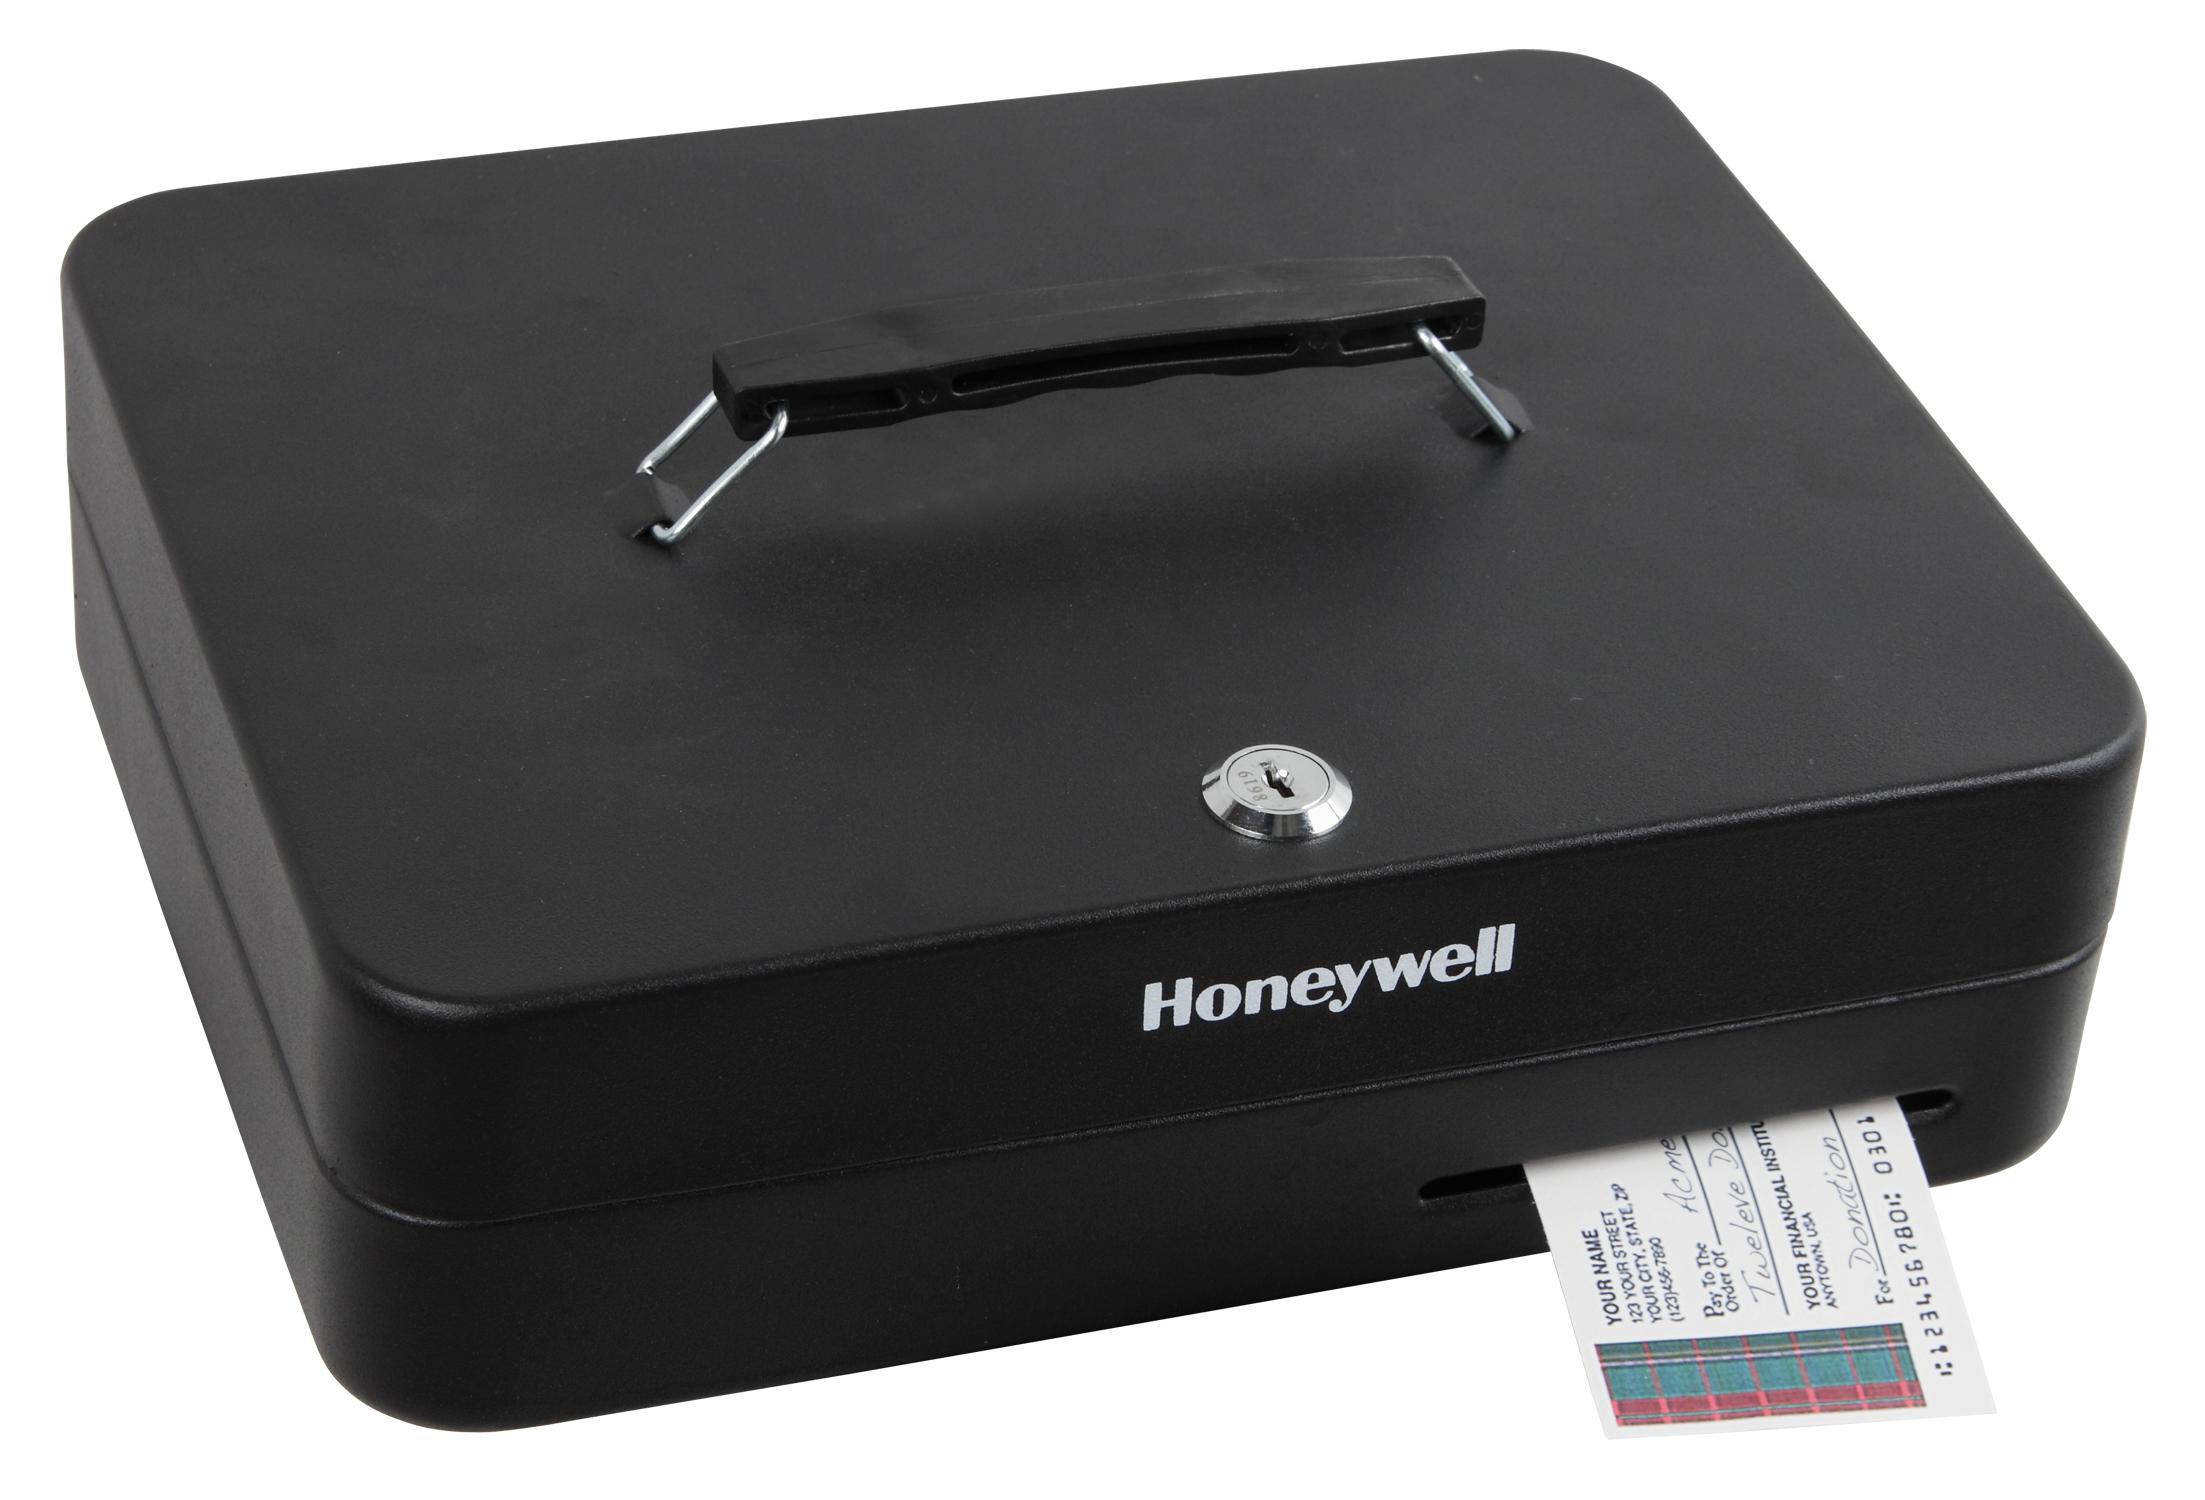 The Honeywell Model 6113 Deluxe Cash Box includes a removable cash tray  with 1 bill and 8 coin slots and has 4 currency clips in lid.